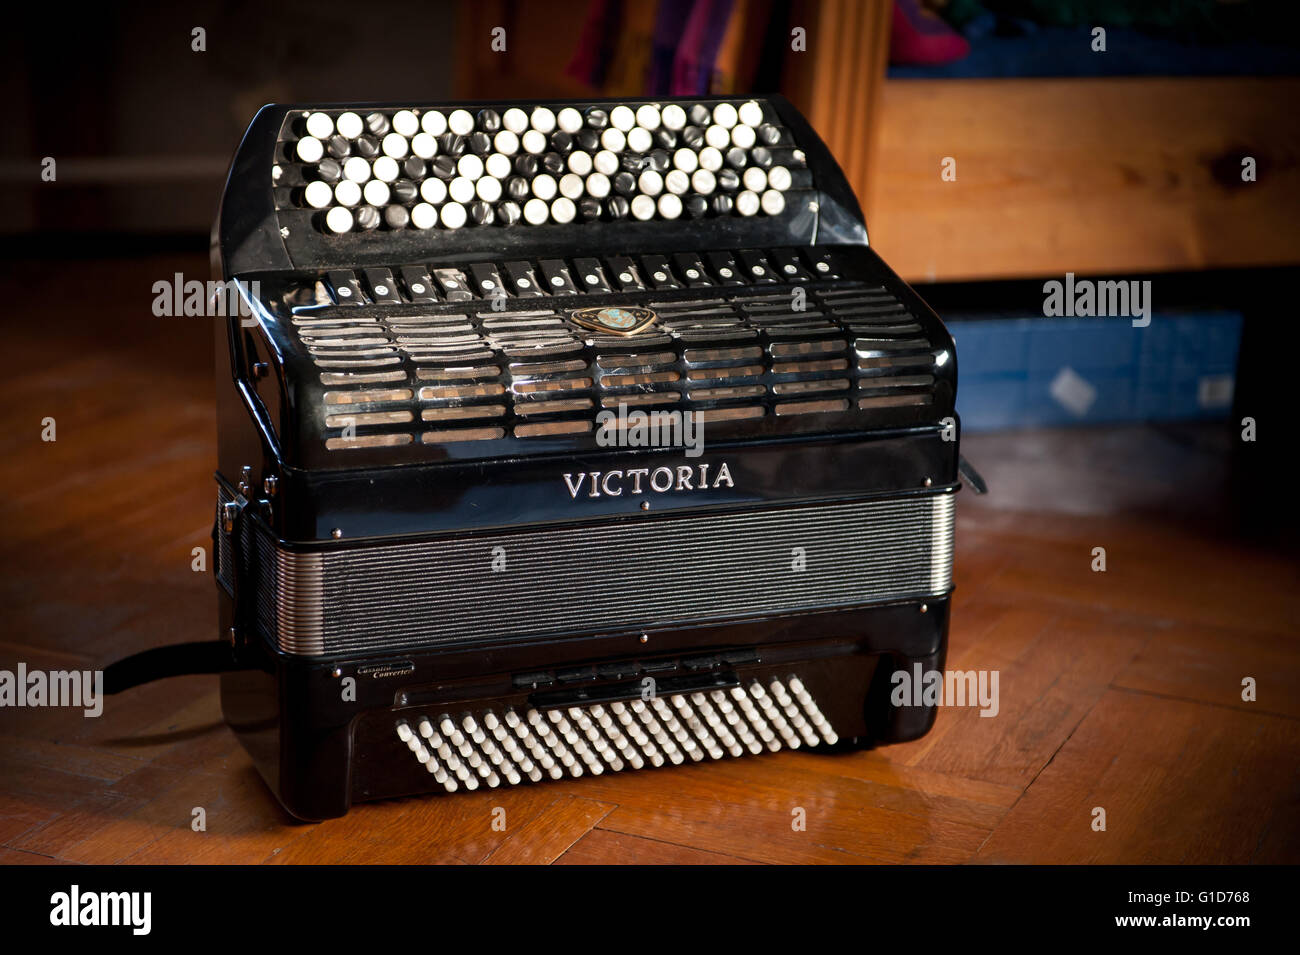 Victoria button accordion, black squeezebox musical instrument standing on the parquet floor in house interior, one melodeon. Stock Photo